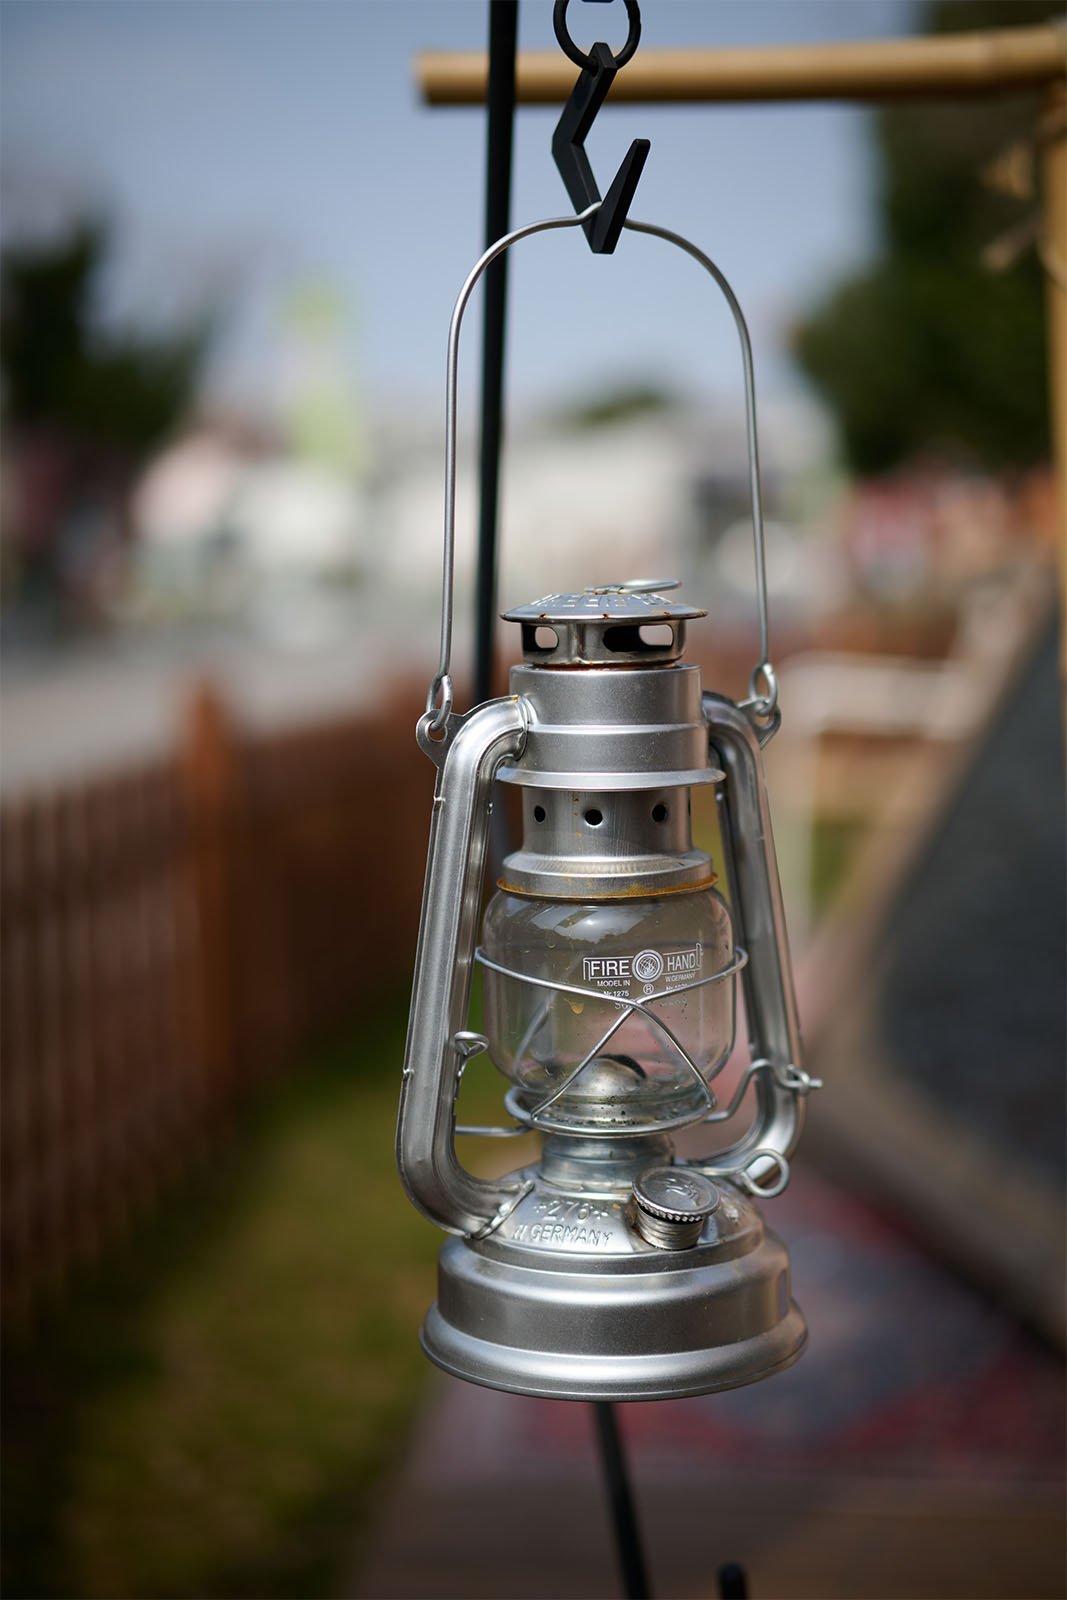 A close-up of a vintage style, silver feuerhand lantern hanging from a metal hook outdoors, with a softly blurred background of a street scene.